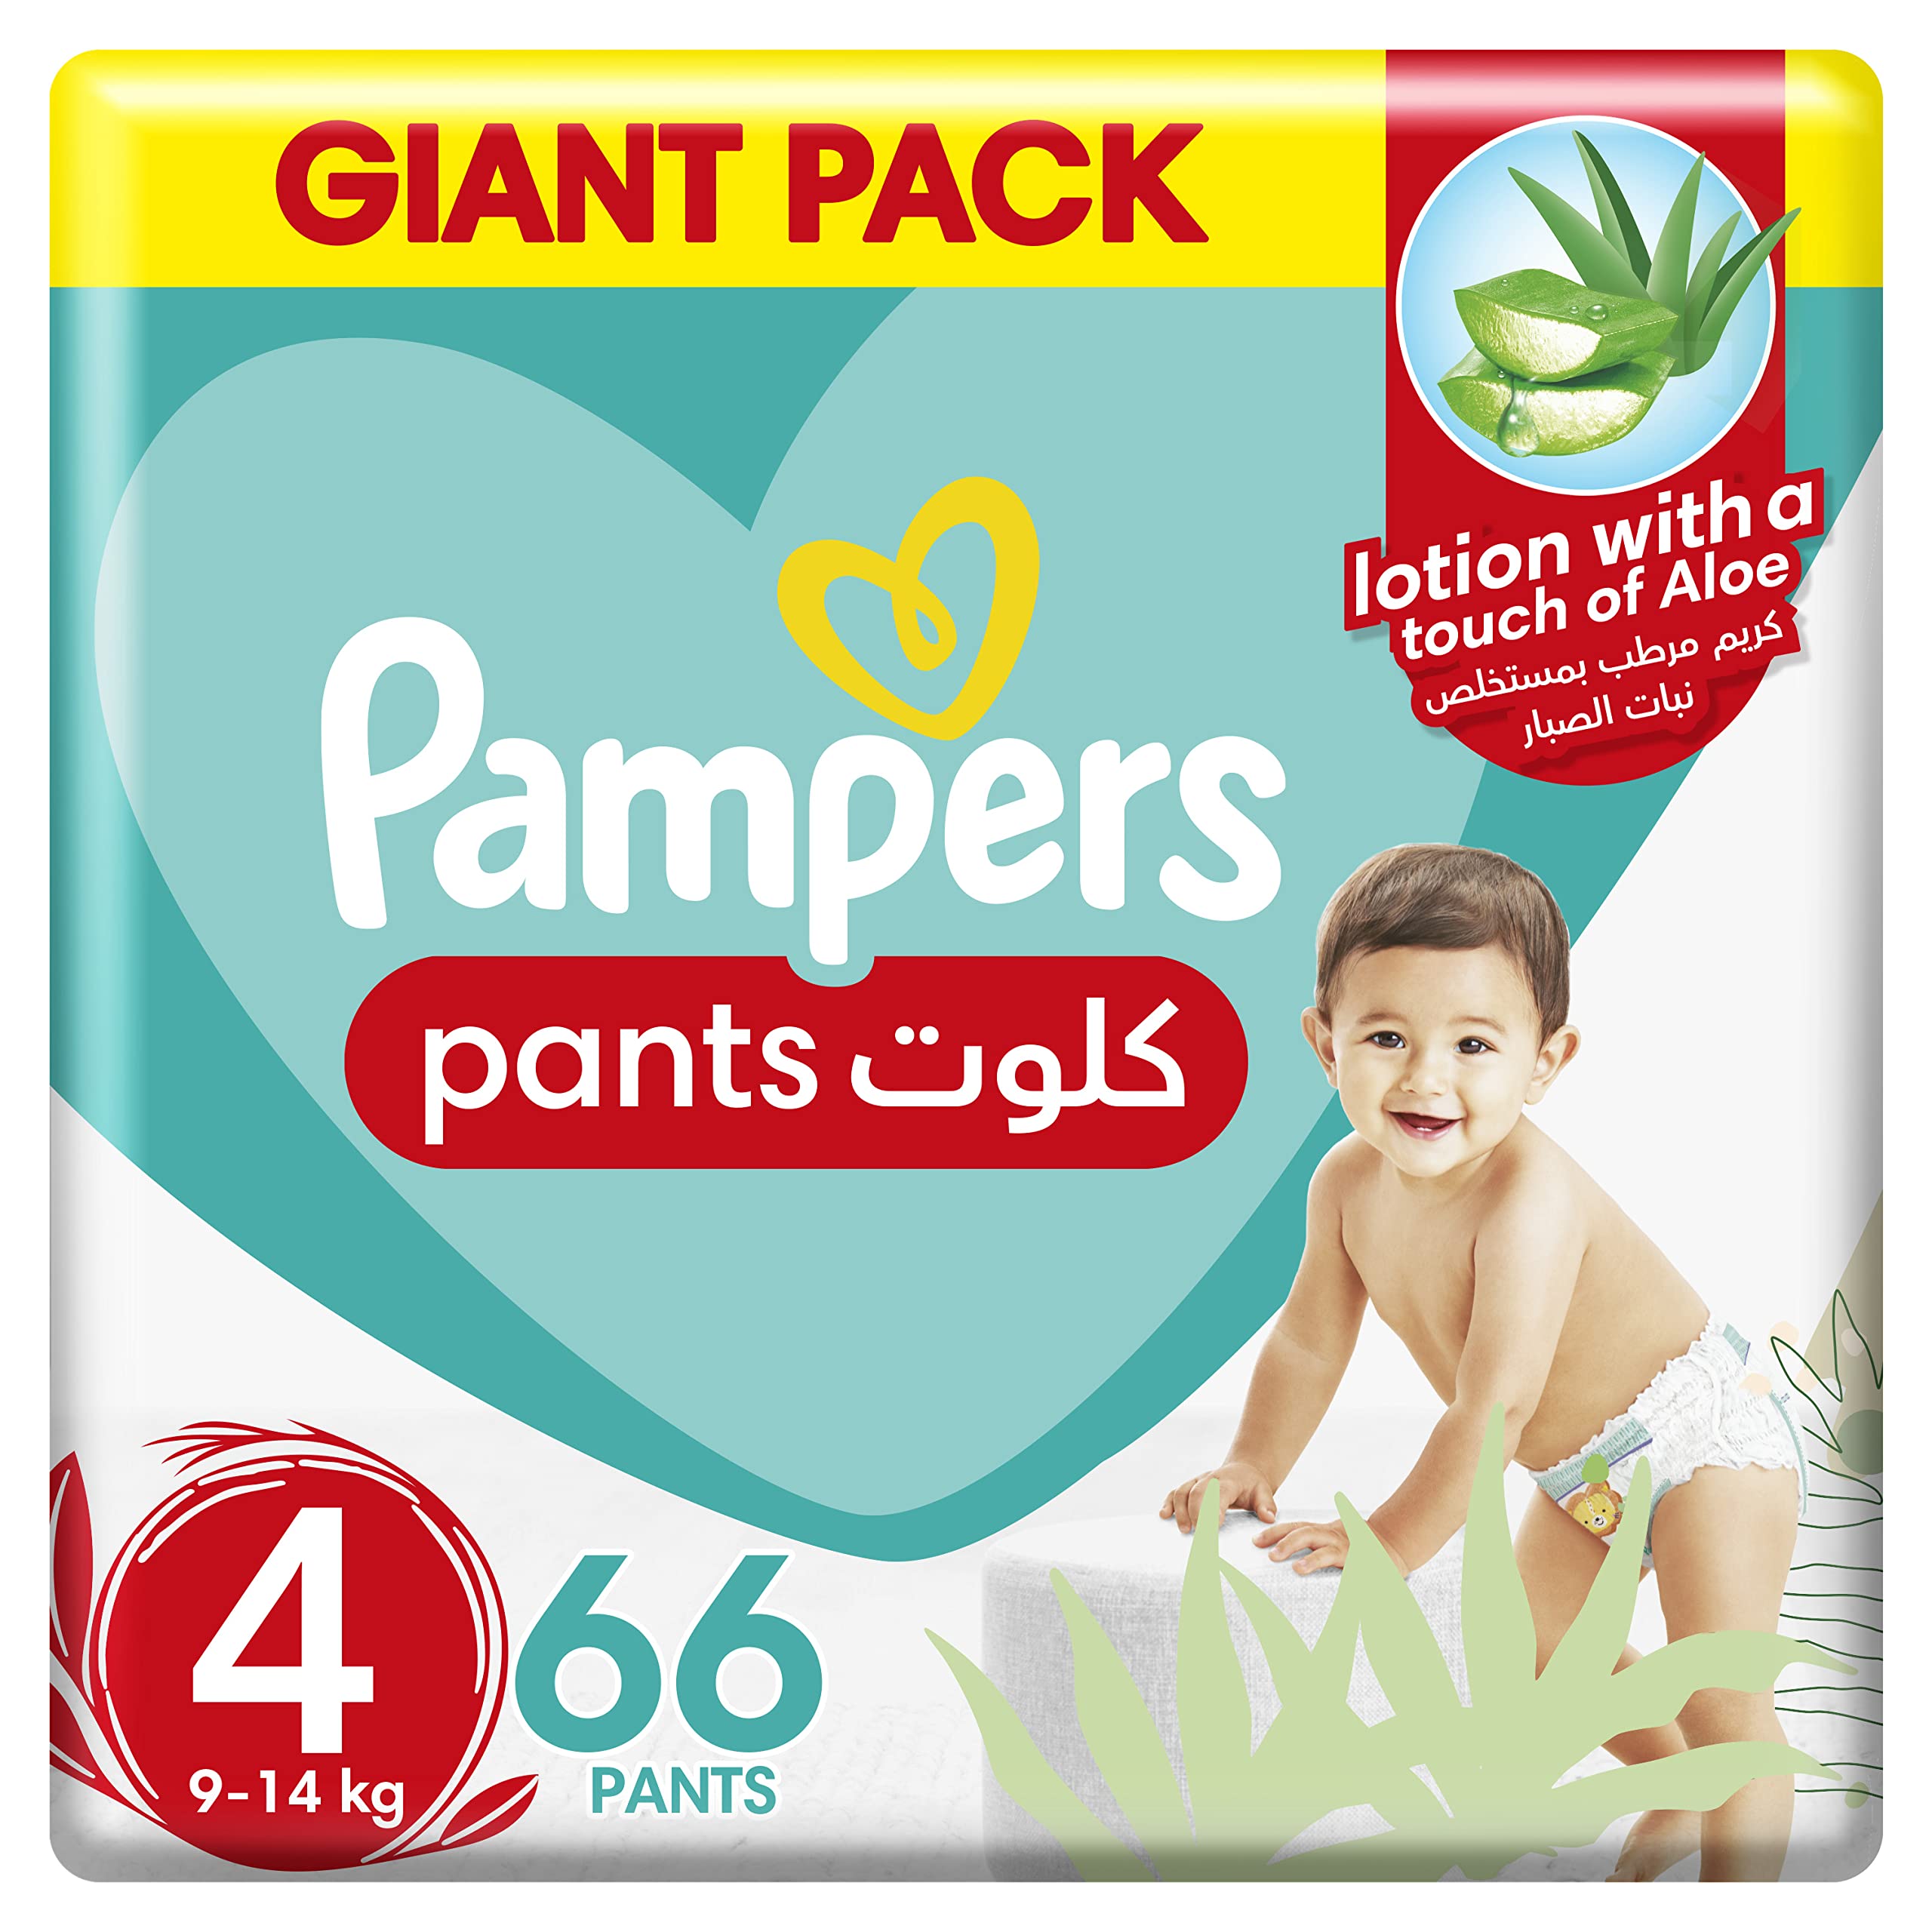 Pampers Baby-Dry Pants with Aloe Vera Lotion, Stretchy Sides, and Leakage Protection, Size 4, 9-14 kg, Mega Pack, 66 Pants حفاضات بيبي دراي بانتس من بامبرز بمقاس 4، ووزن 9-14 كغم، 66 قطعة